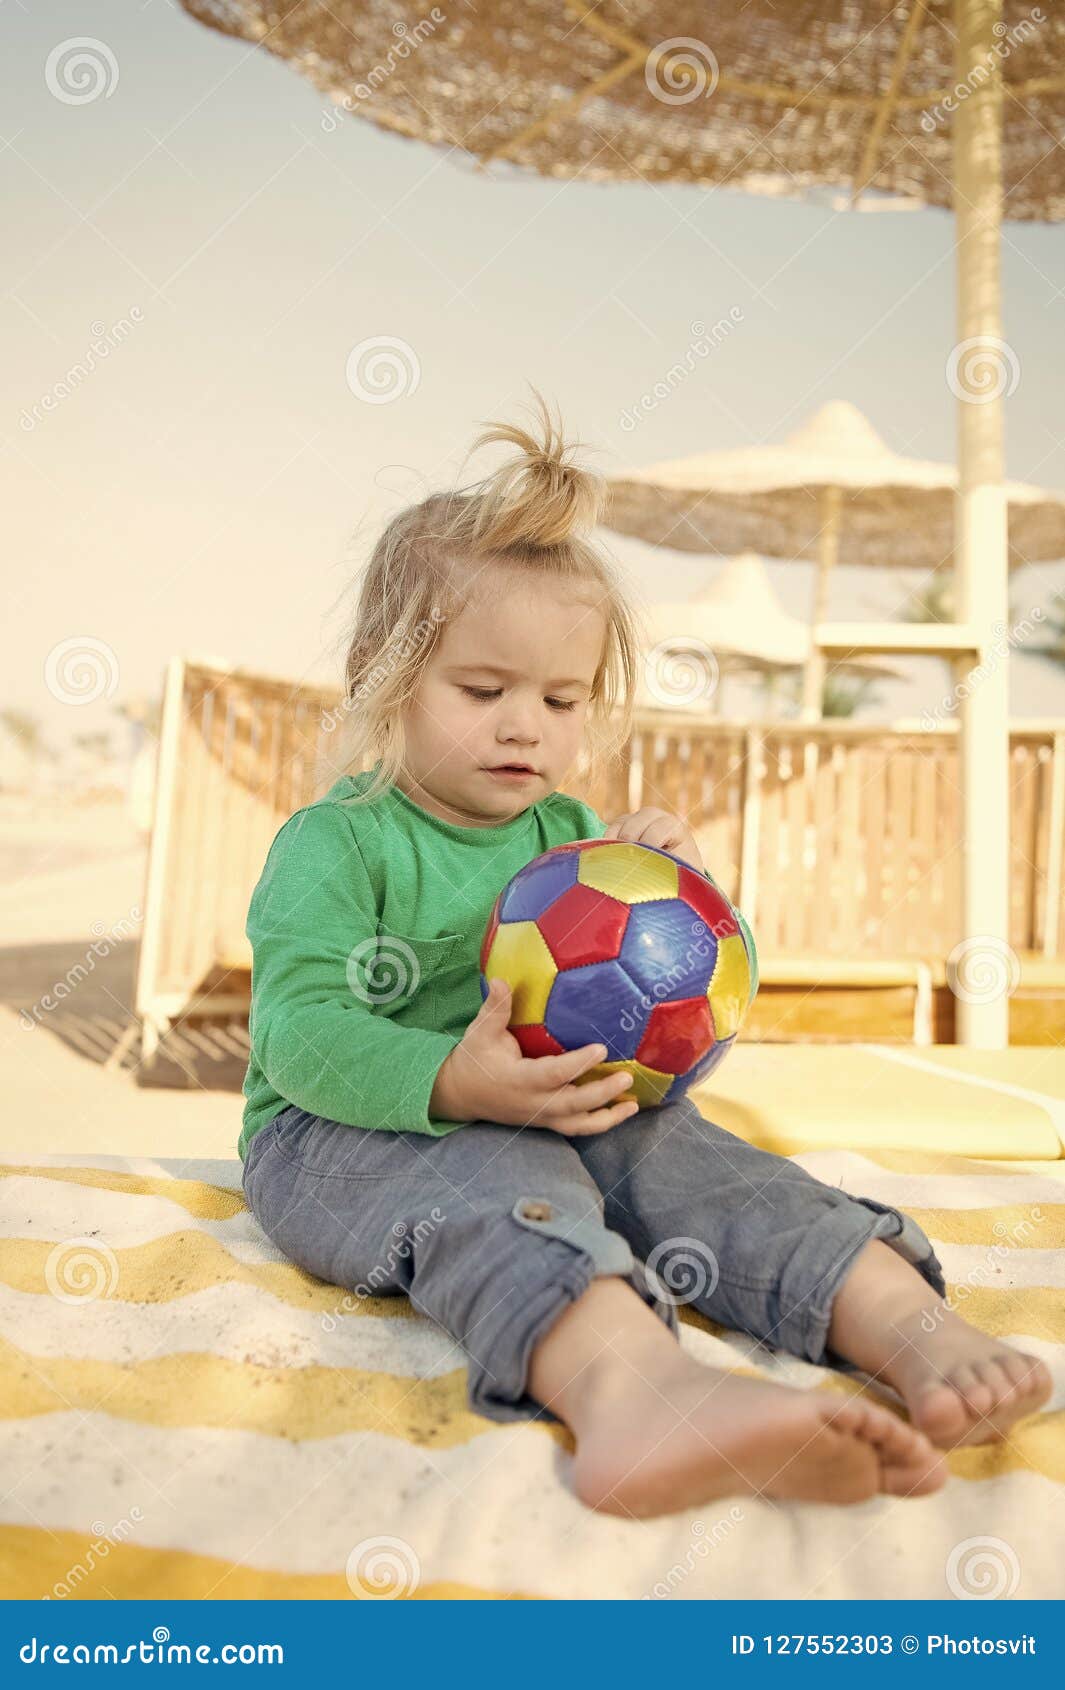 Download Small Baby Boy With Adorable Face Sunny Summer With Ball Stock Image - Image of ball, blonde ...